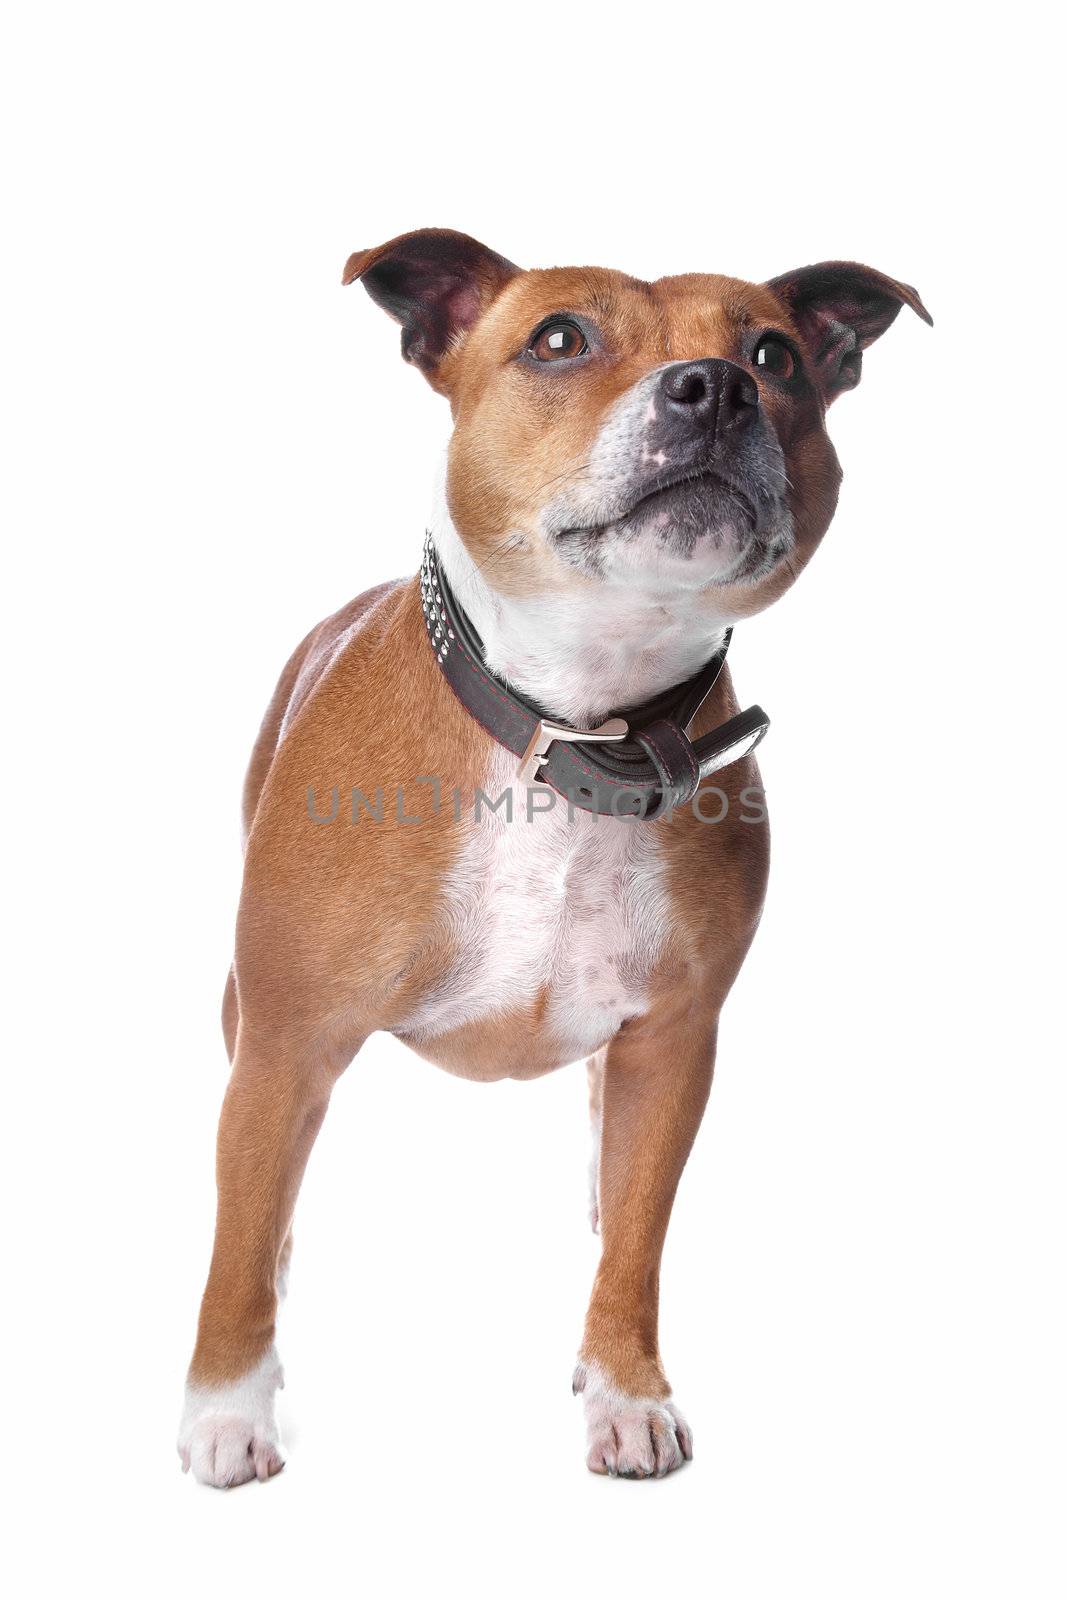 english staffordshire bull terrier (staffordshire, staffy, staffie, stafford) lying on the floor, isolated on a white background